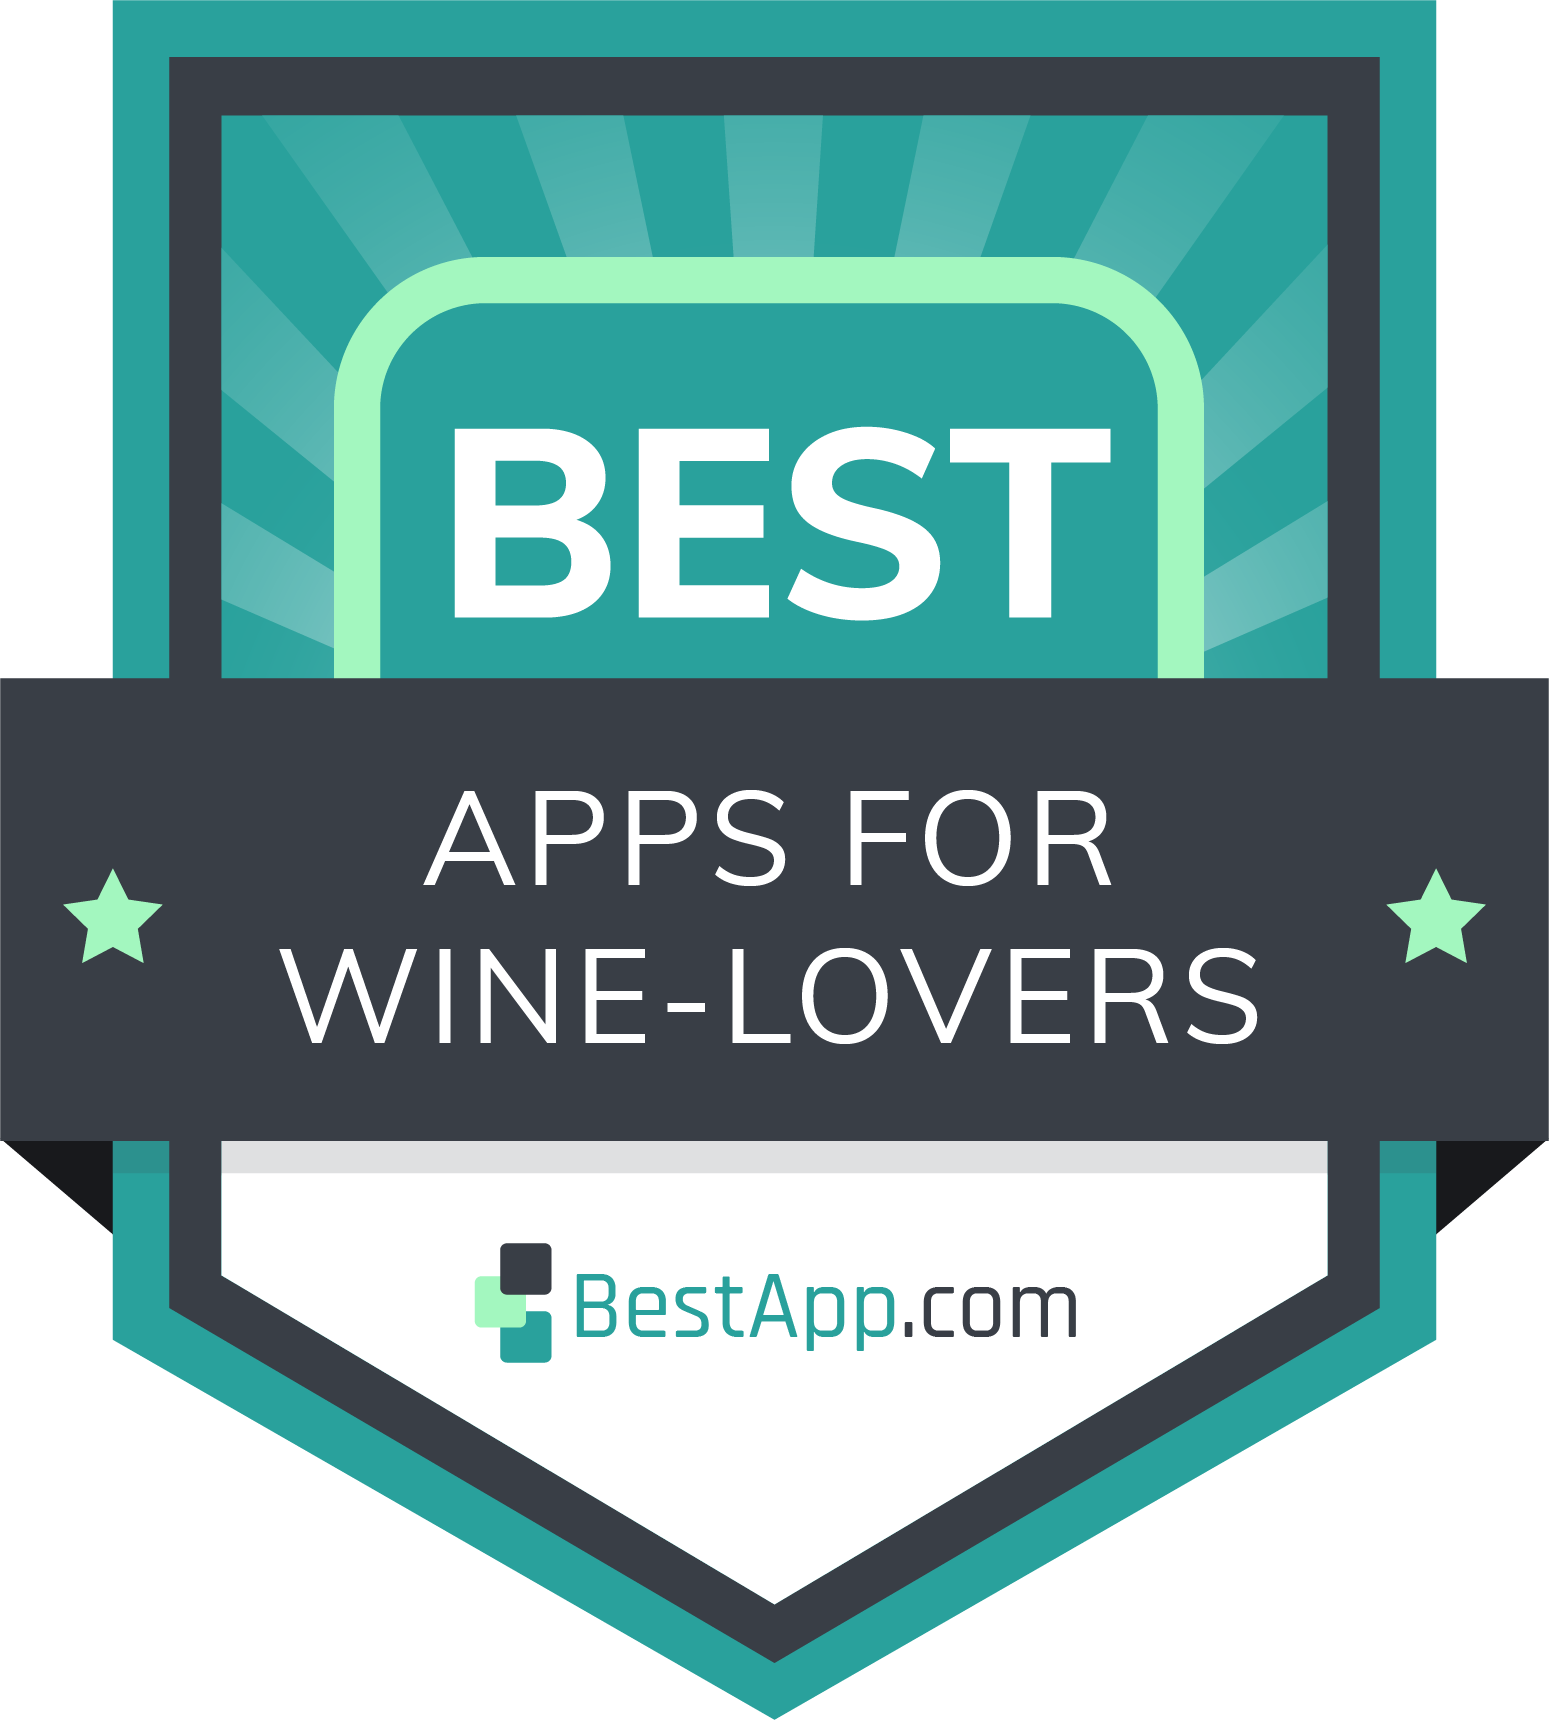 Best Apps for Wine-Lovers Badge